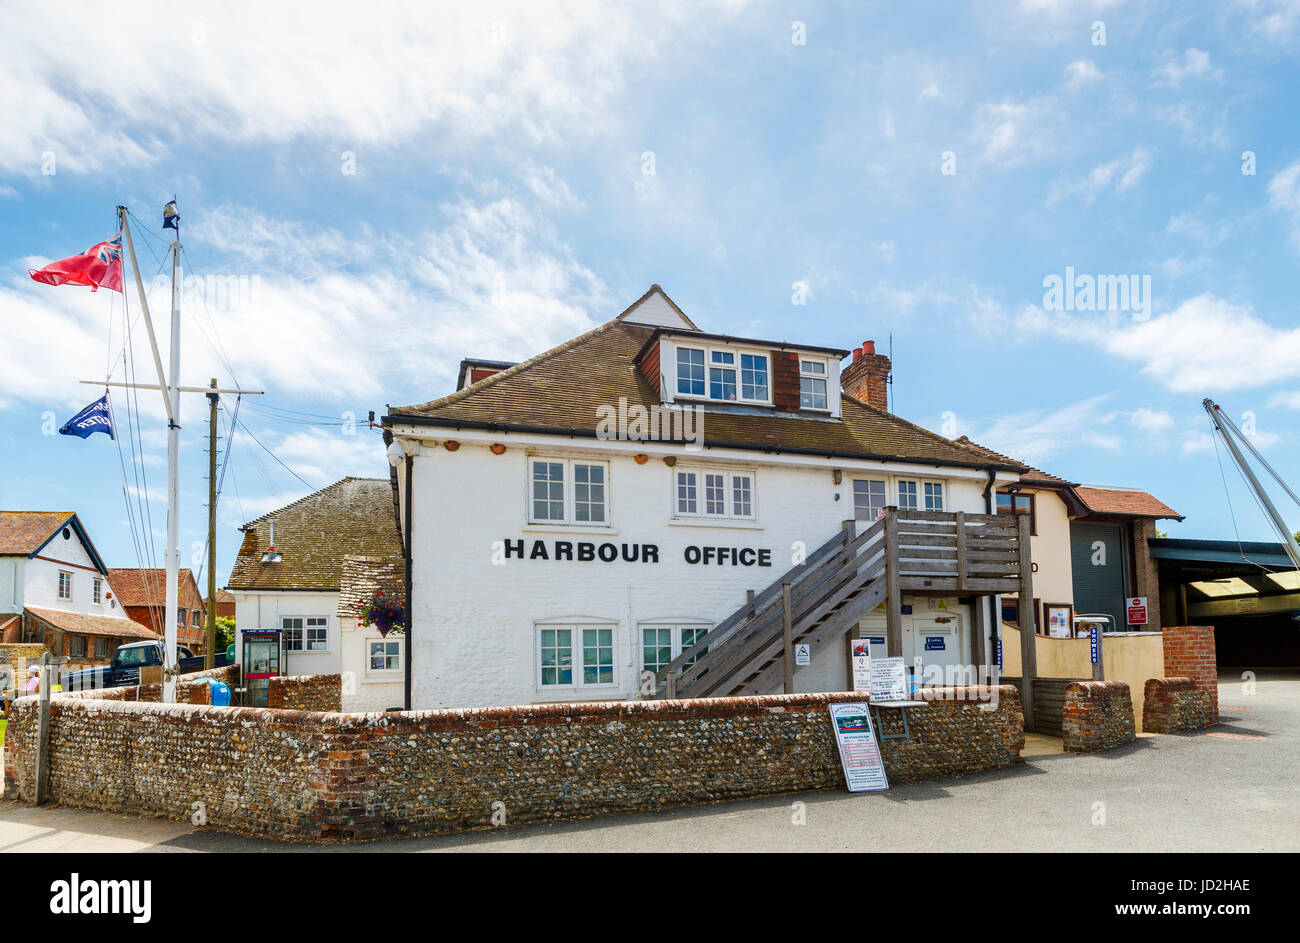 Harbour Office at West Itchenor, a small village in Chichester Harbour near Chichester on the south coast of England, UK Stock Photo